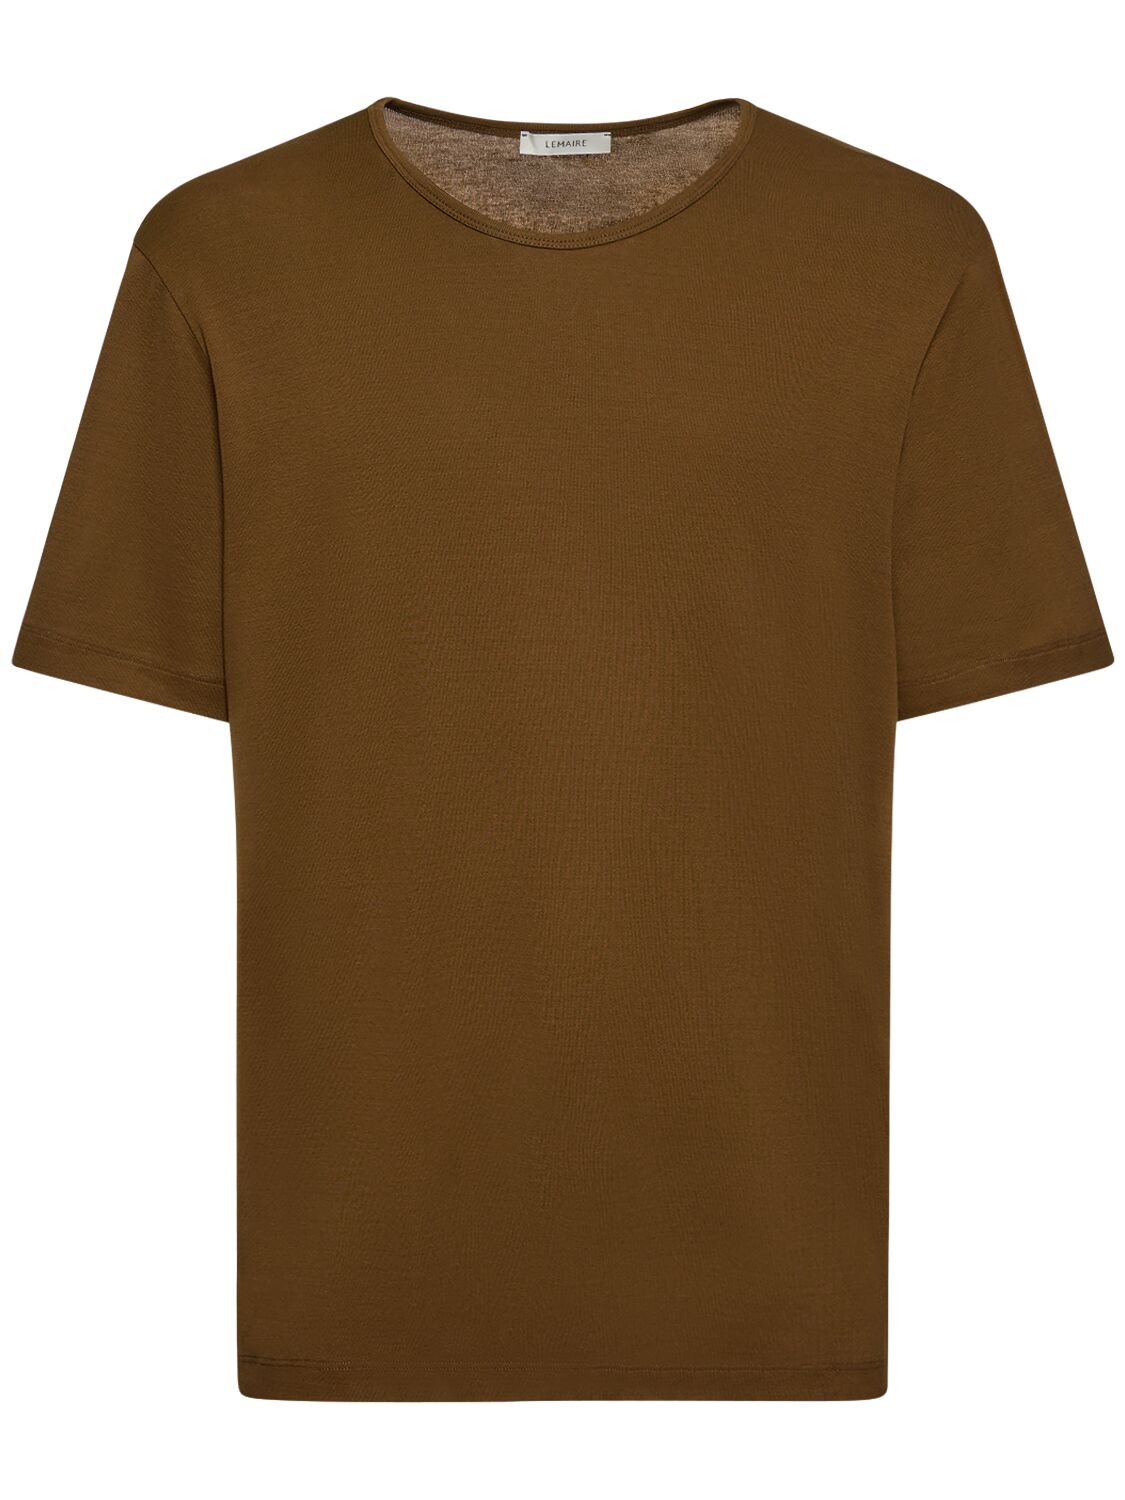 Image of Cotton Jersey T-shirt